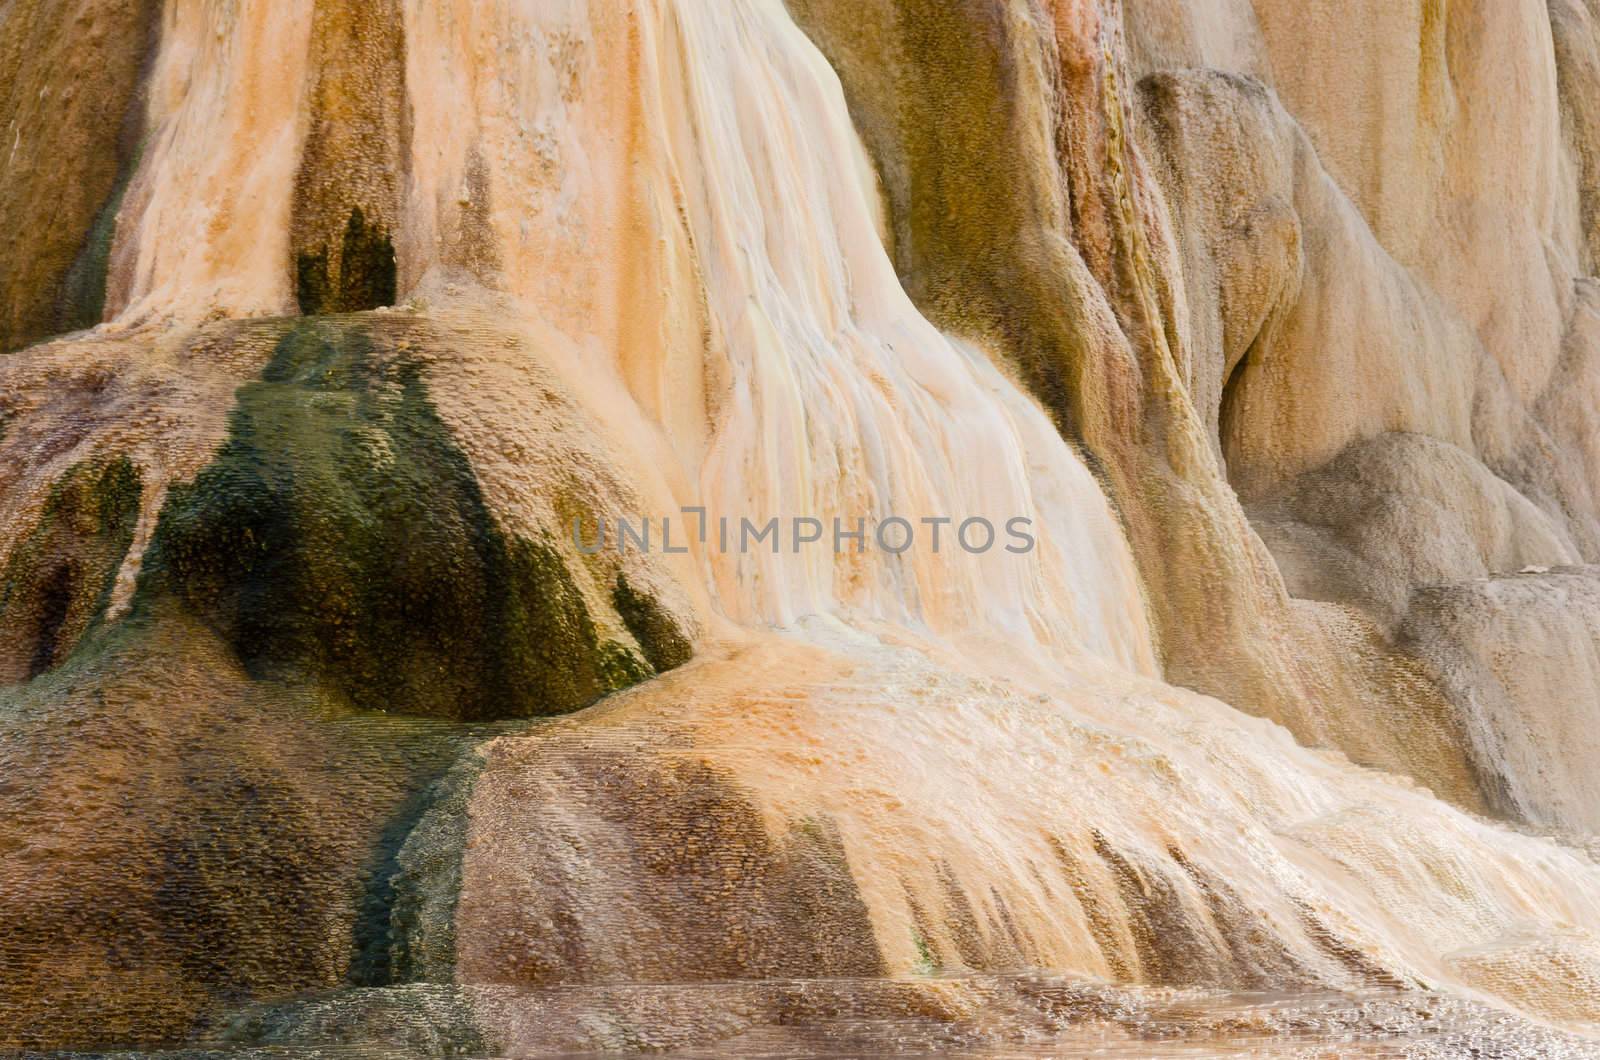 Detail of Mound Terrace, Mammoth Hot Springs, Yellowstone National Park, Wyoming, USA by CharlesBolin